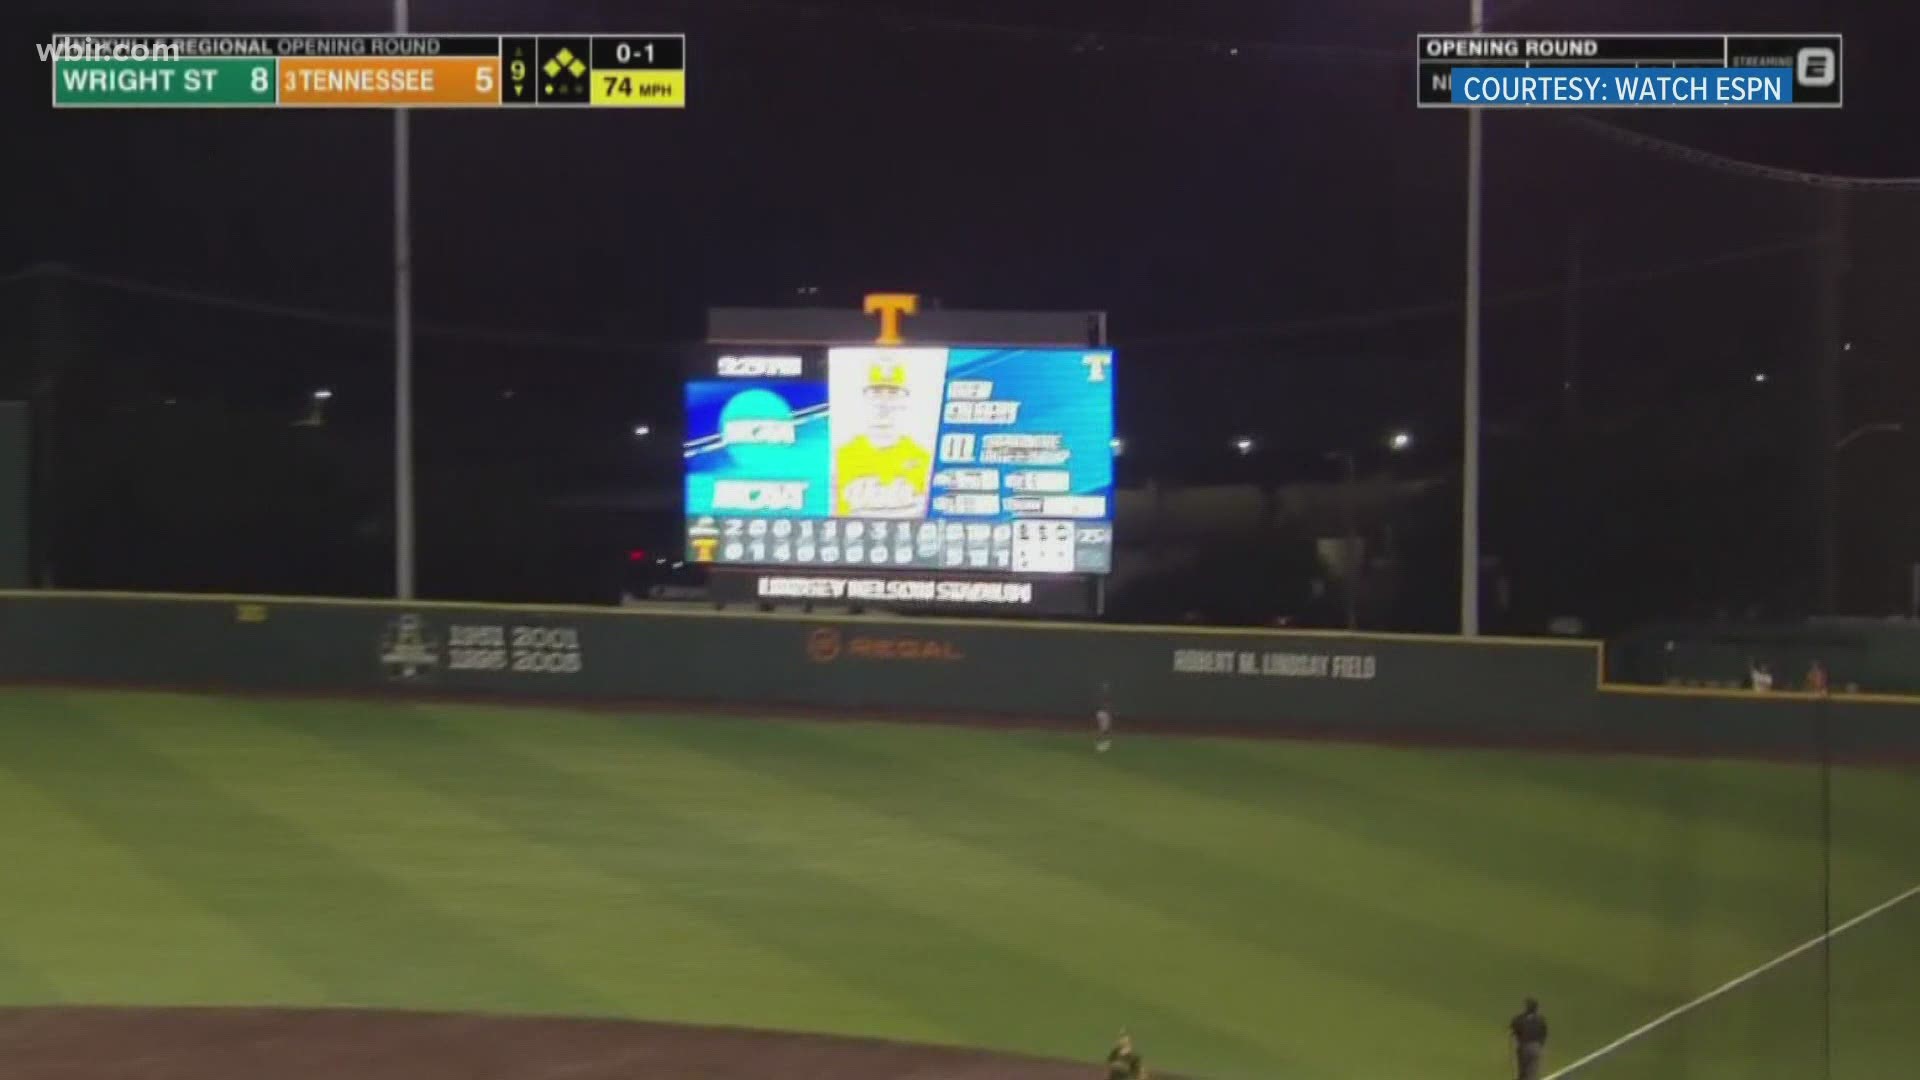 The Vols baseball has seen its share of dramatic finishes this season on its way to the Super Regional.